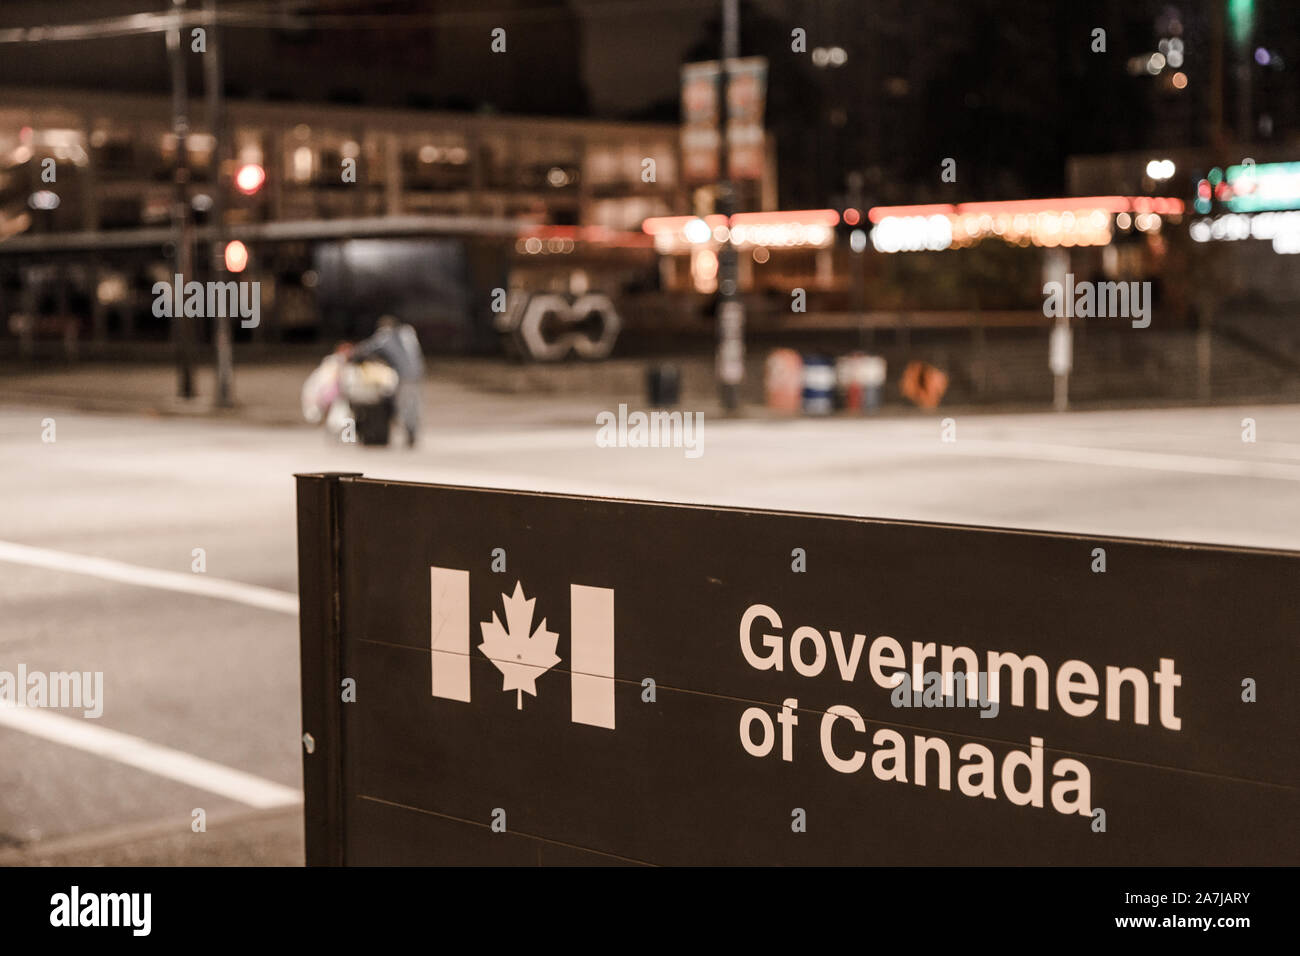 VANCOUVER, BC, CANADA - OCT 05, 2019: A homeless man with a shopping cart, out of focus, passing by a Government of Canada, subject of focus, federal Stock Photo